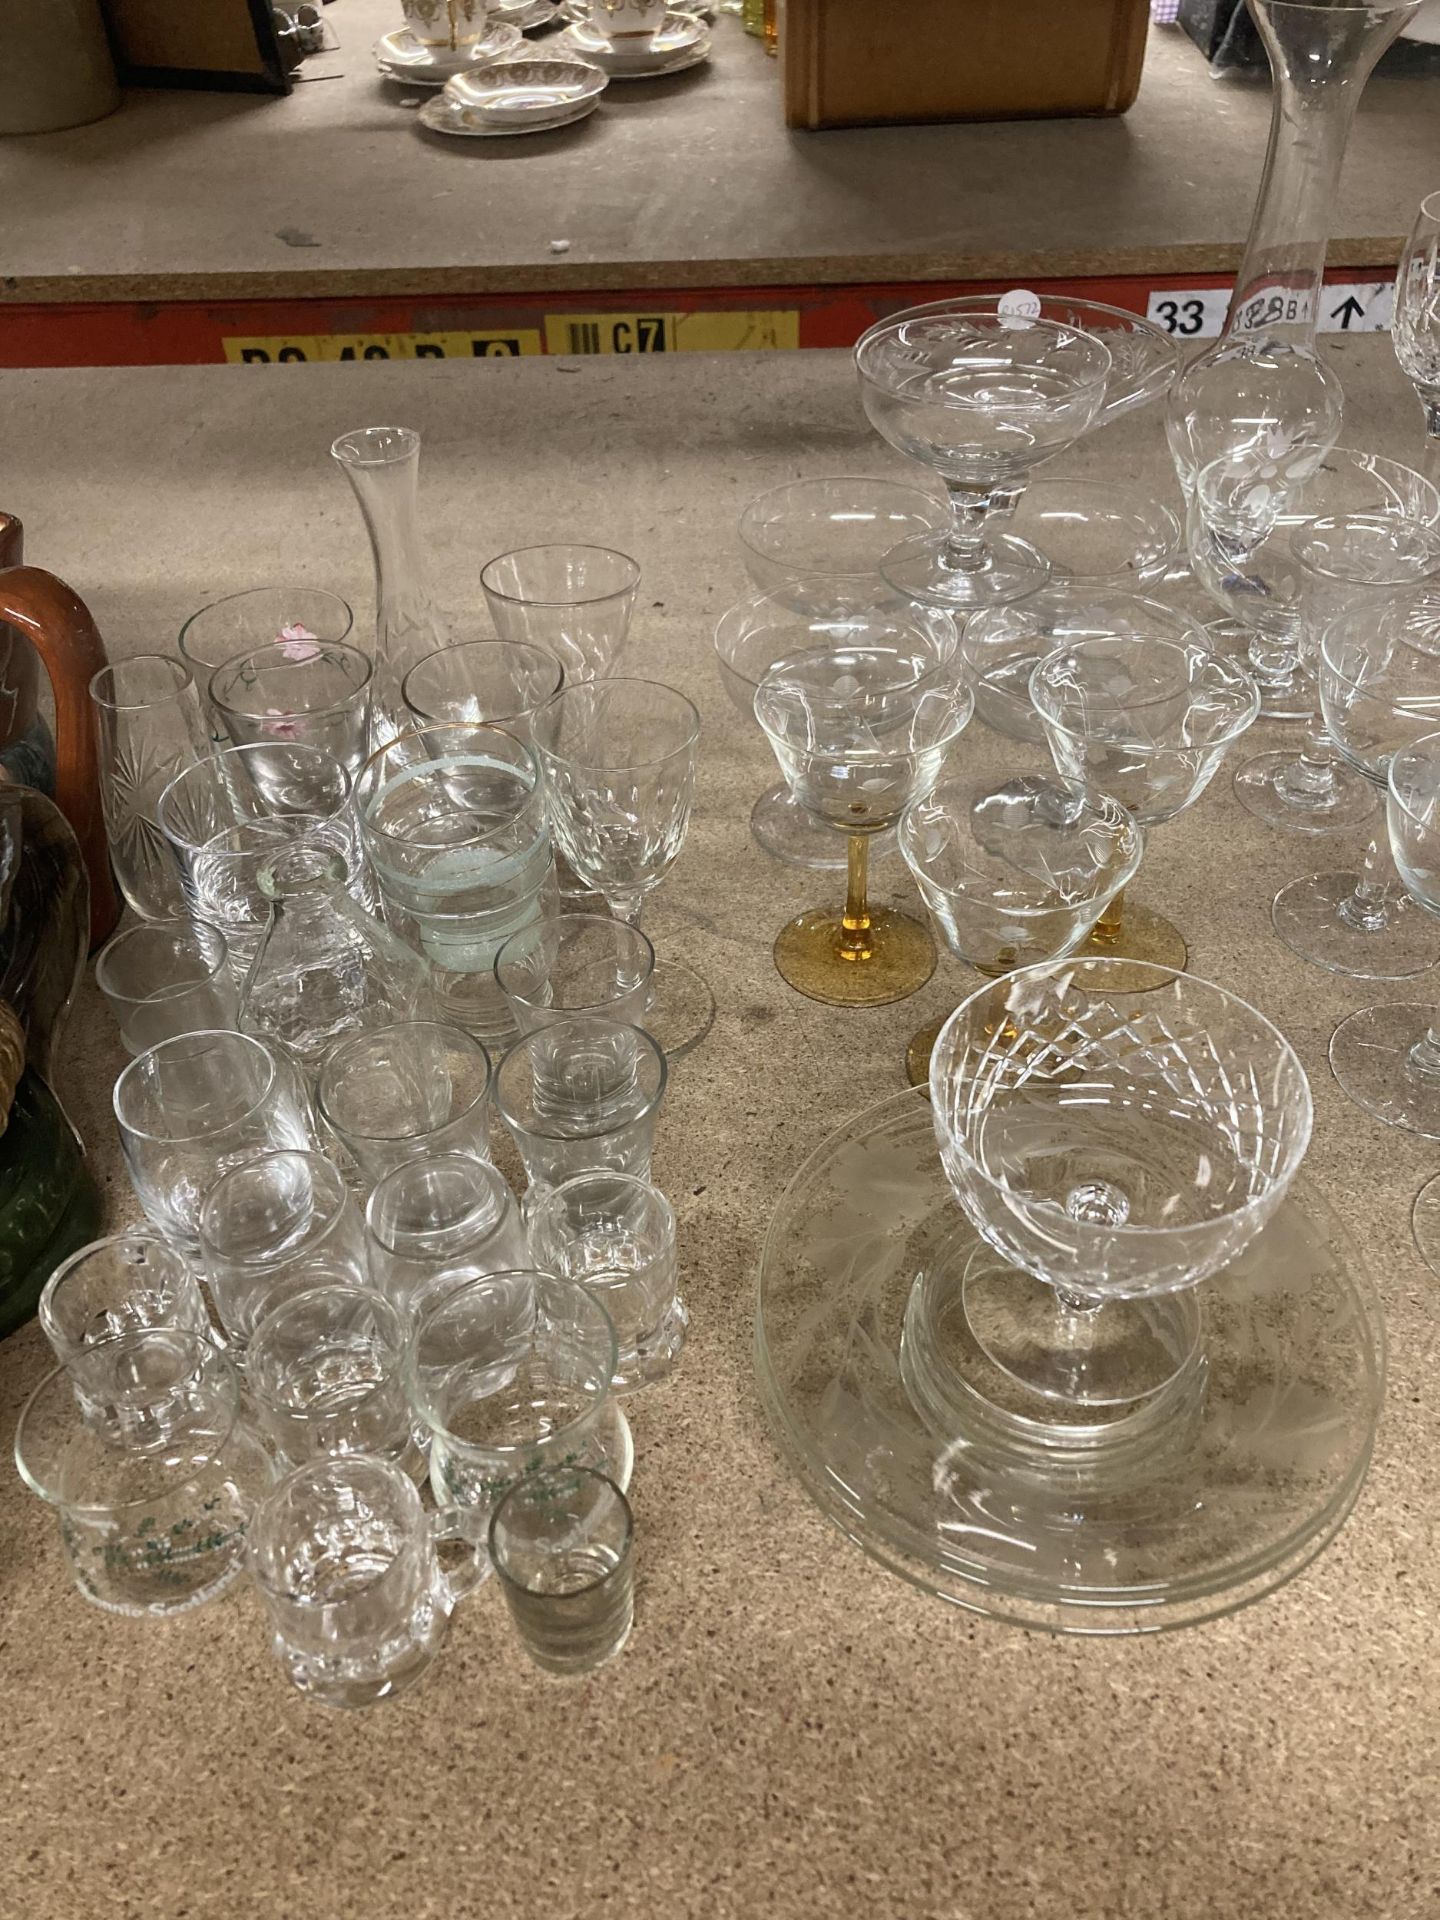 A VERY LARGE QUANTITY OF GLASSES TO INCLUDE WINE, SHERRY, BRANDY, COCKTAIL, PORT, LICQUOR, ETC - Image 2 of 7